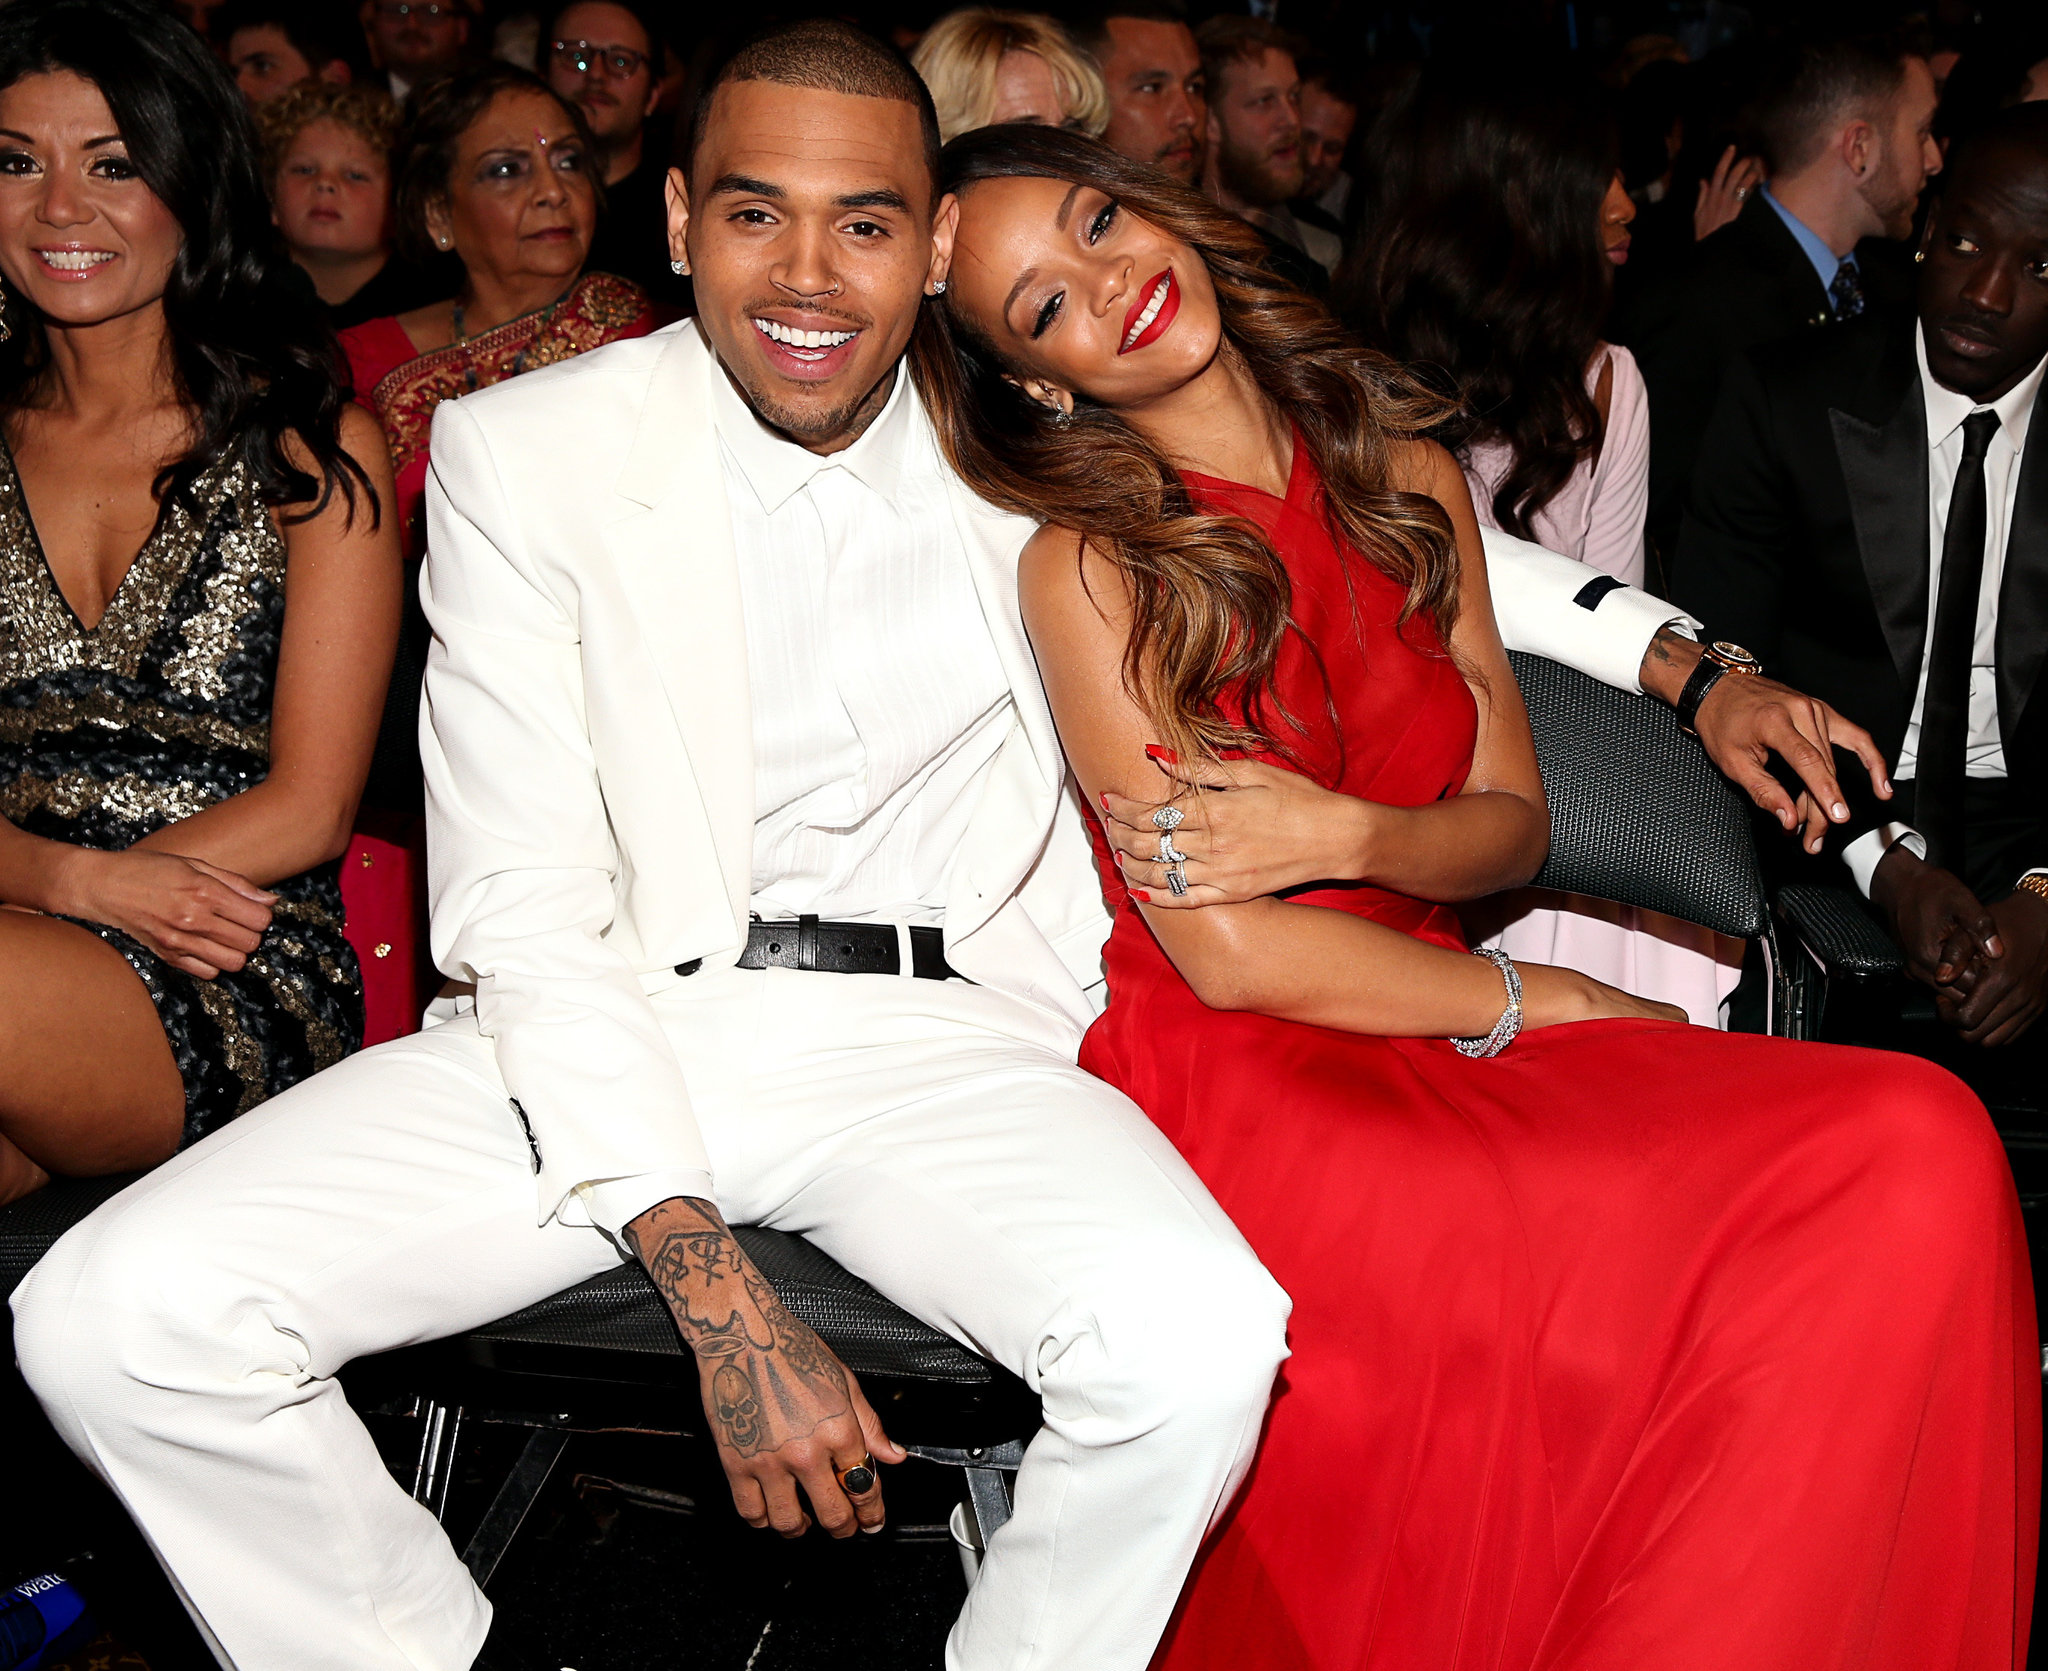 Rihanna and Chris Brown's Relationship Divides the Public - The New York  Times